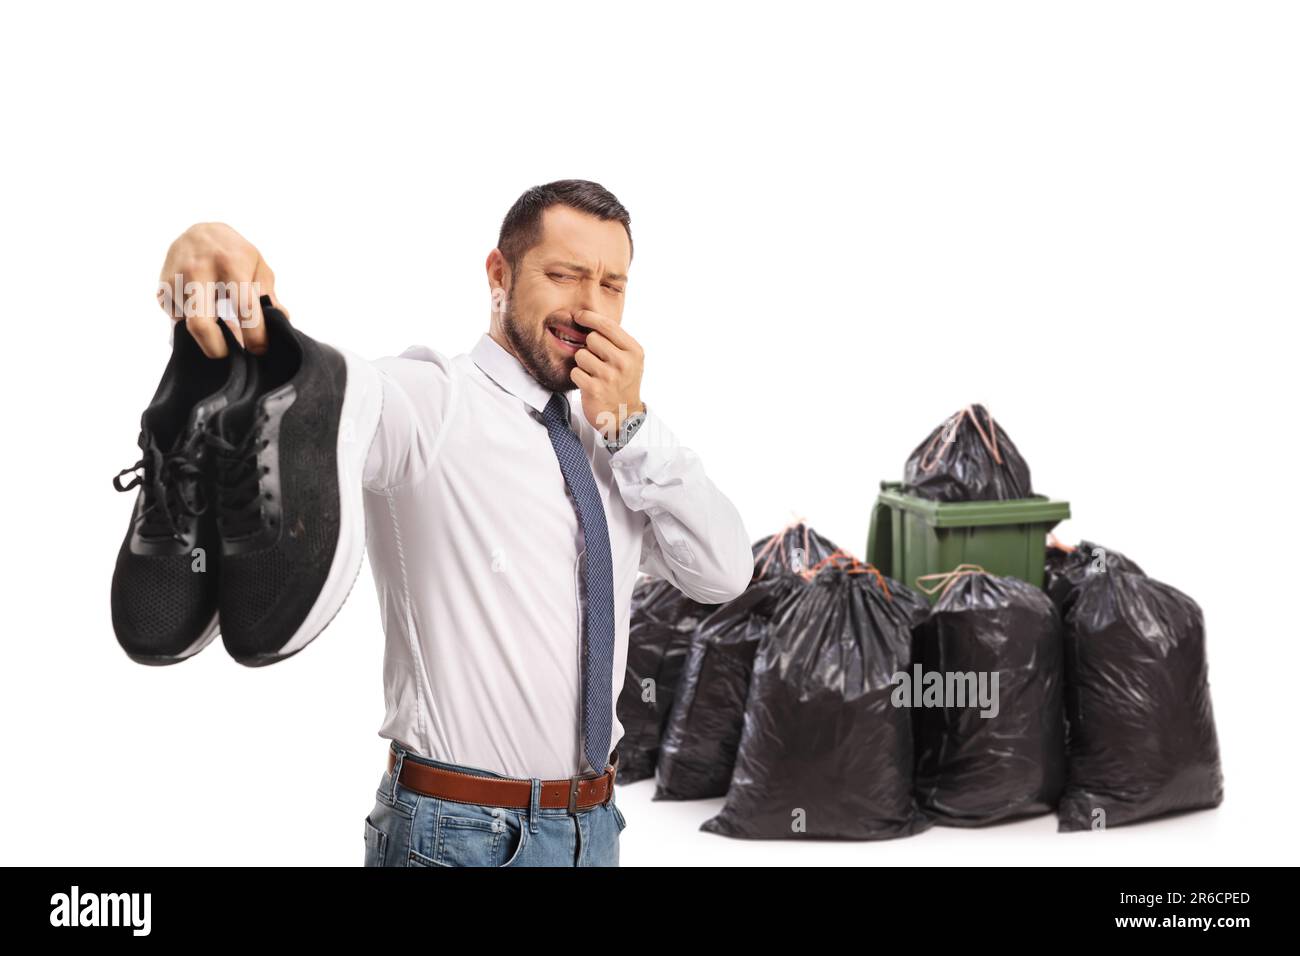 Man holding a pair of smelly trainers in front of waste bins isolated on white background Stock Photo